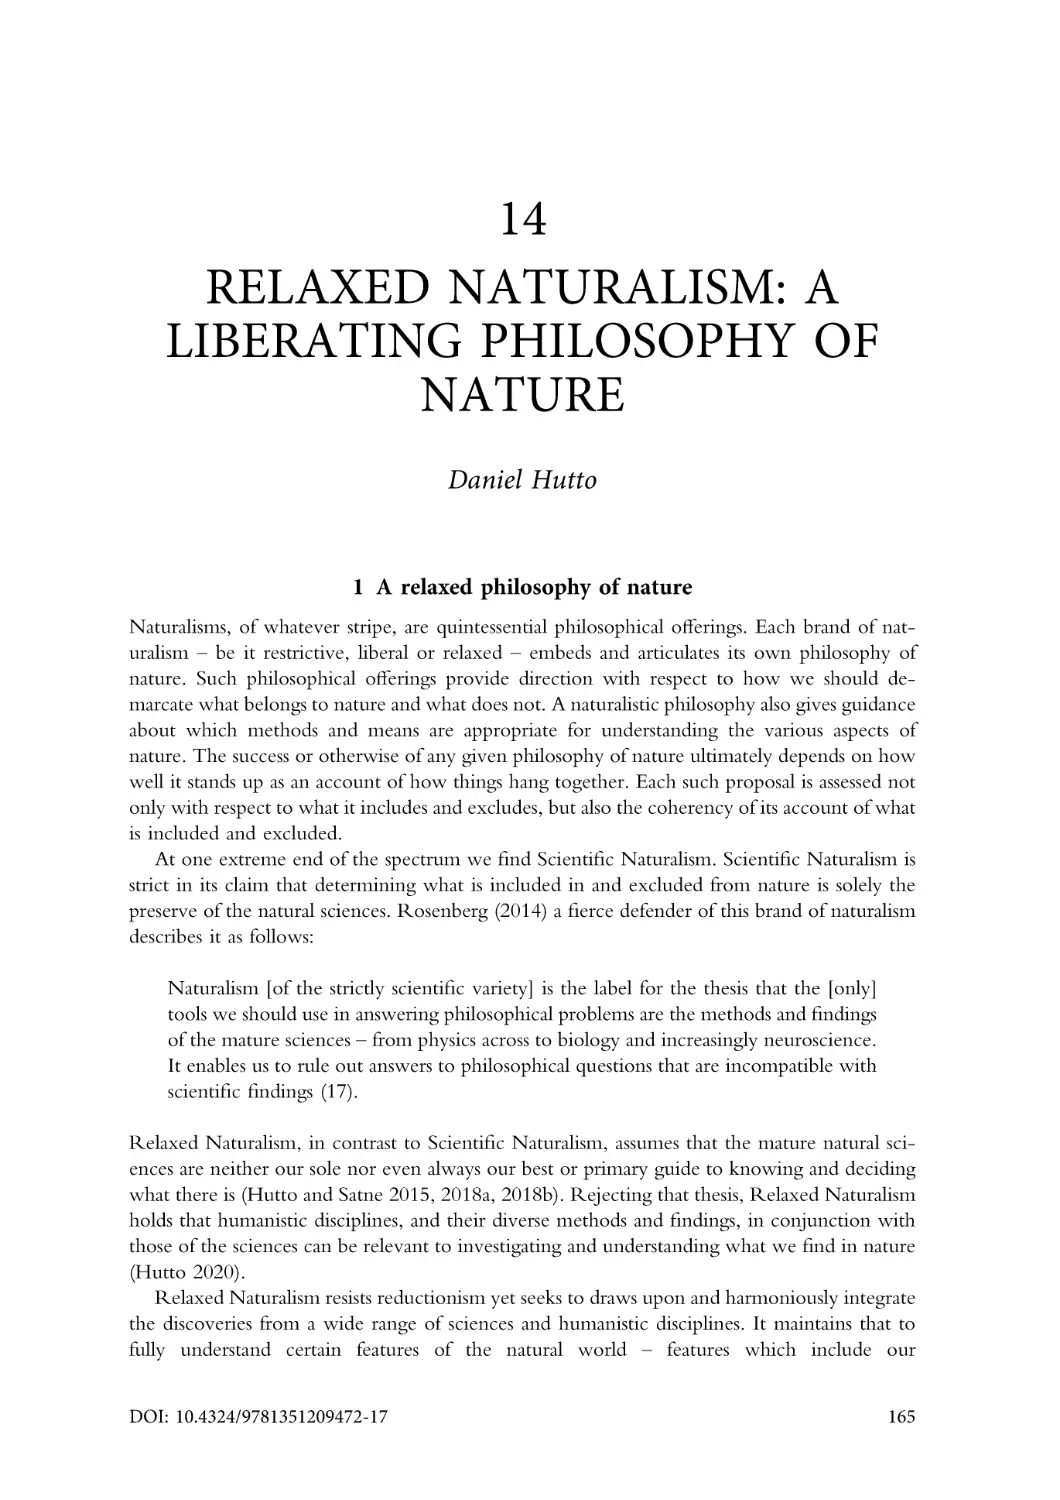 14. Relaxed naturalism
1. A relaxed philosophy of nature